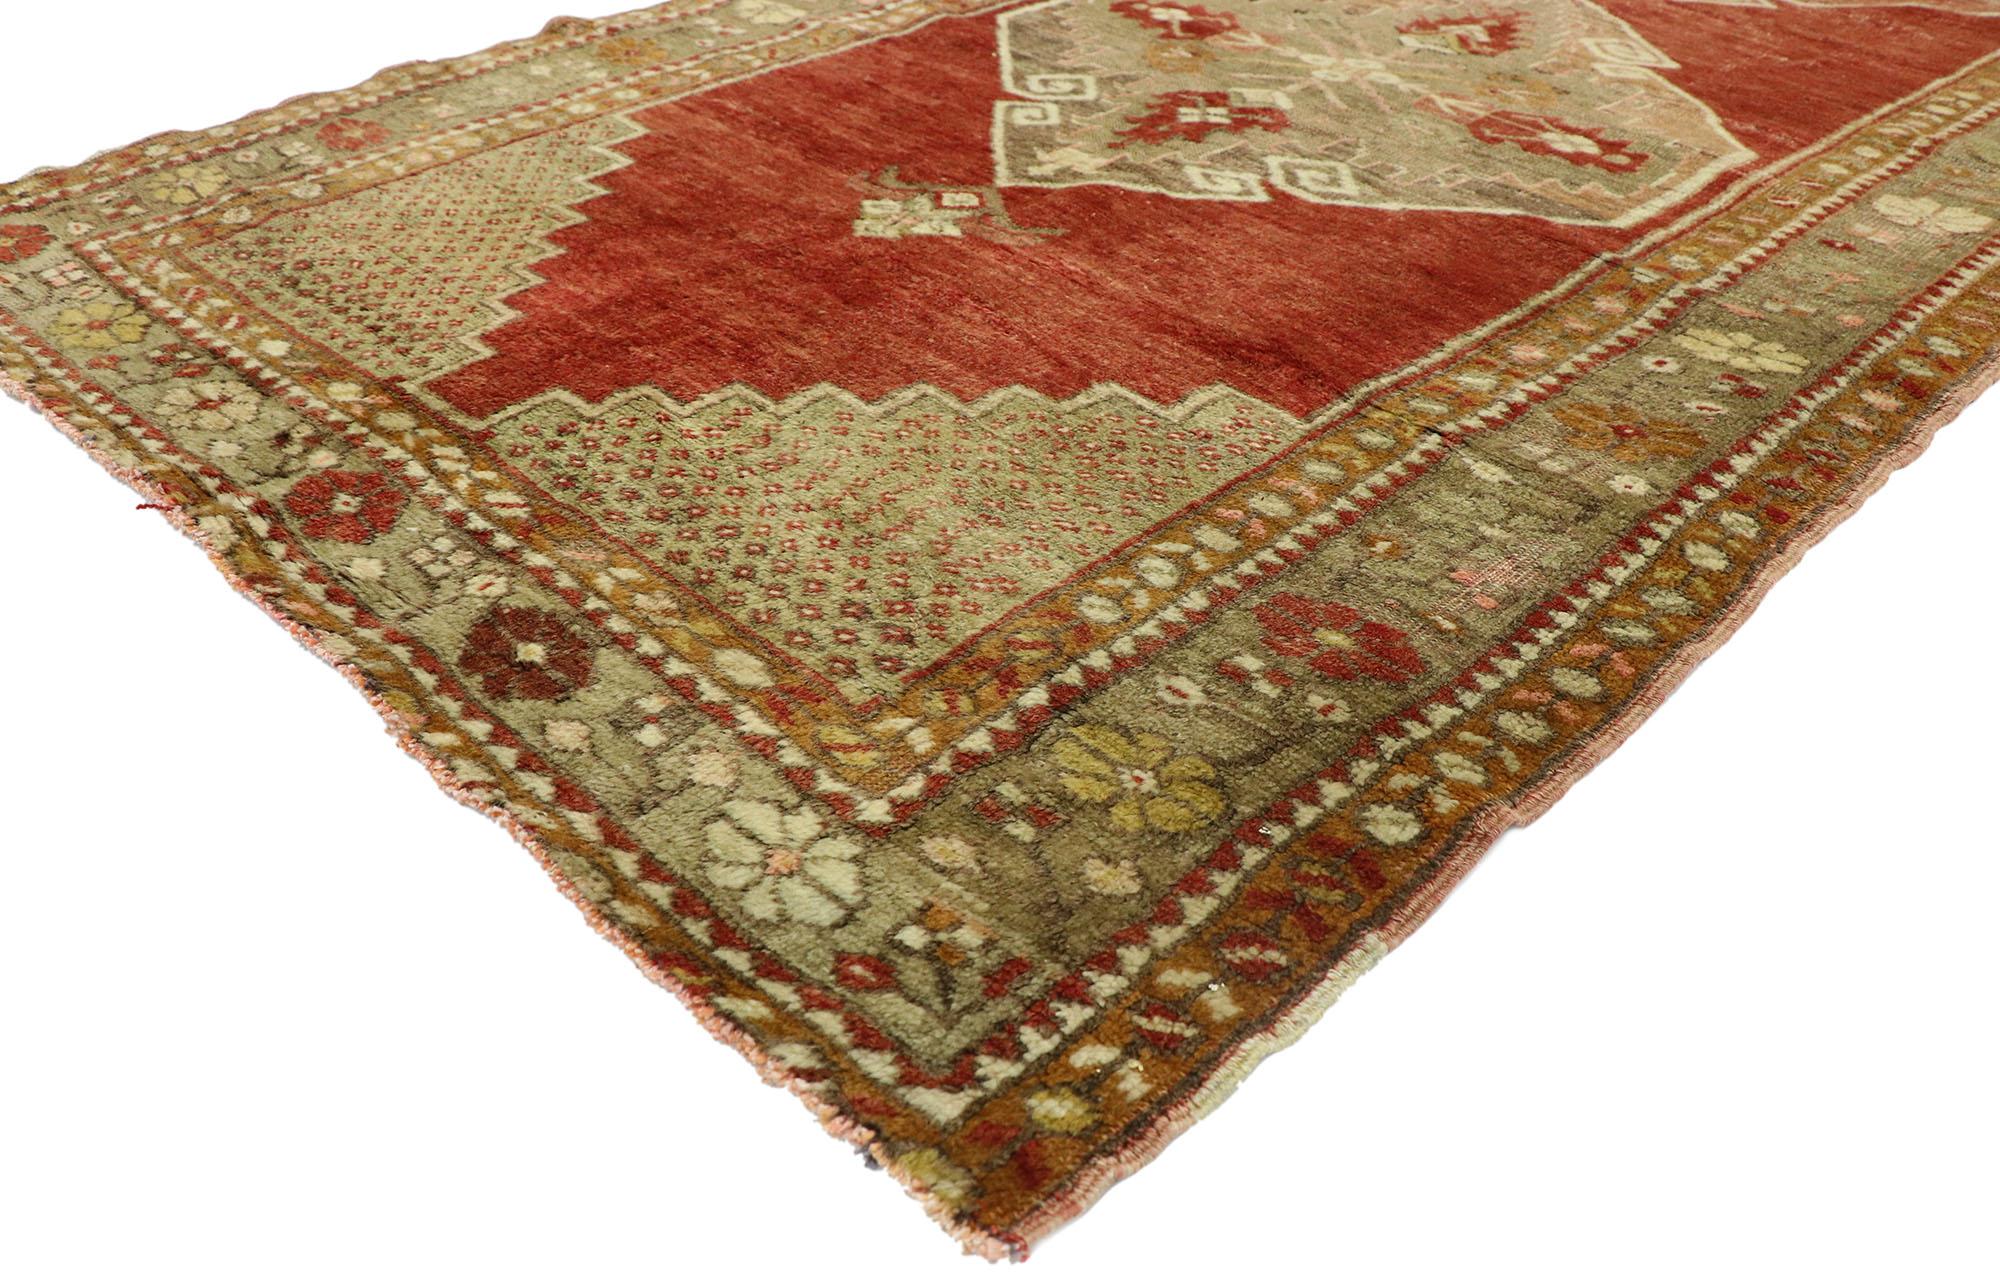 52769, distressed vintage Turkish Oushak runner with English Manor House Tudor style 03'08 x 10'10. With its warm, rich colors and ornate detailing, this hand knotted wool distressed vintage Turkish Oushak runner is well-balanced and poised to